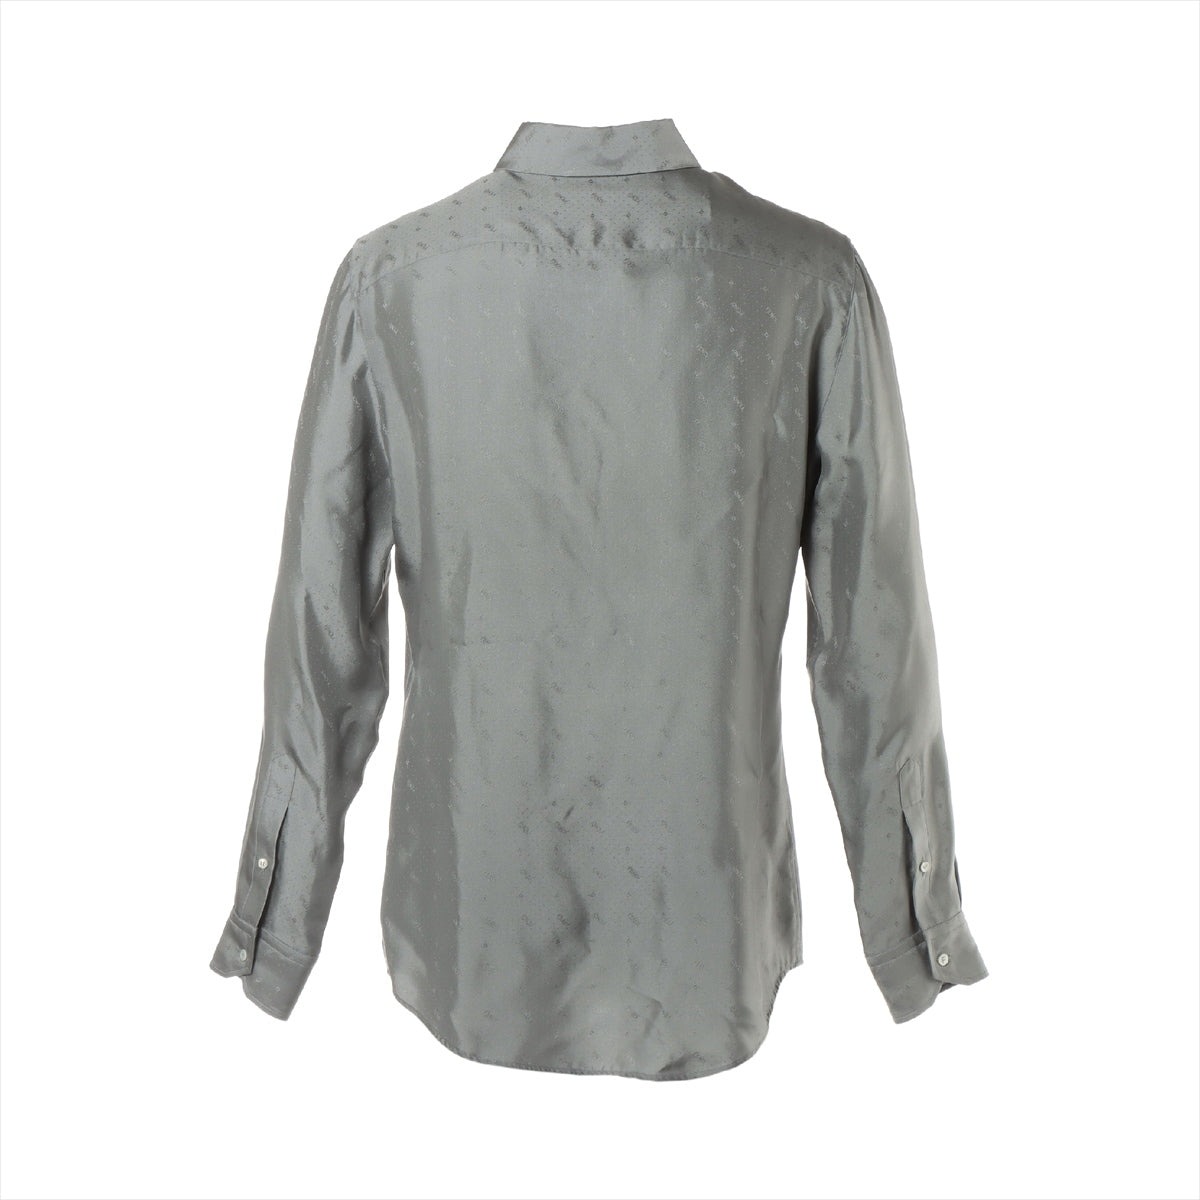 Fendi 21 years Silk Shirt 39 Silver  There is dirt on the cuff Back body There is a crease on the left sleeve